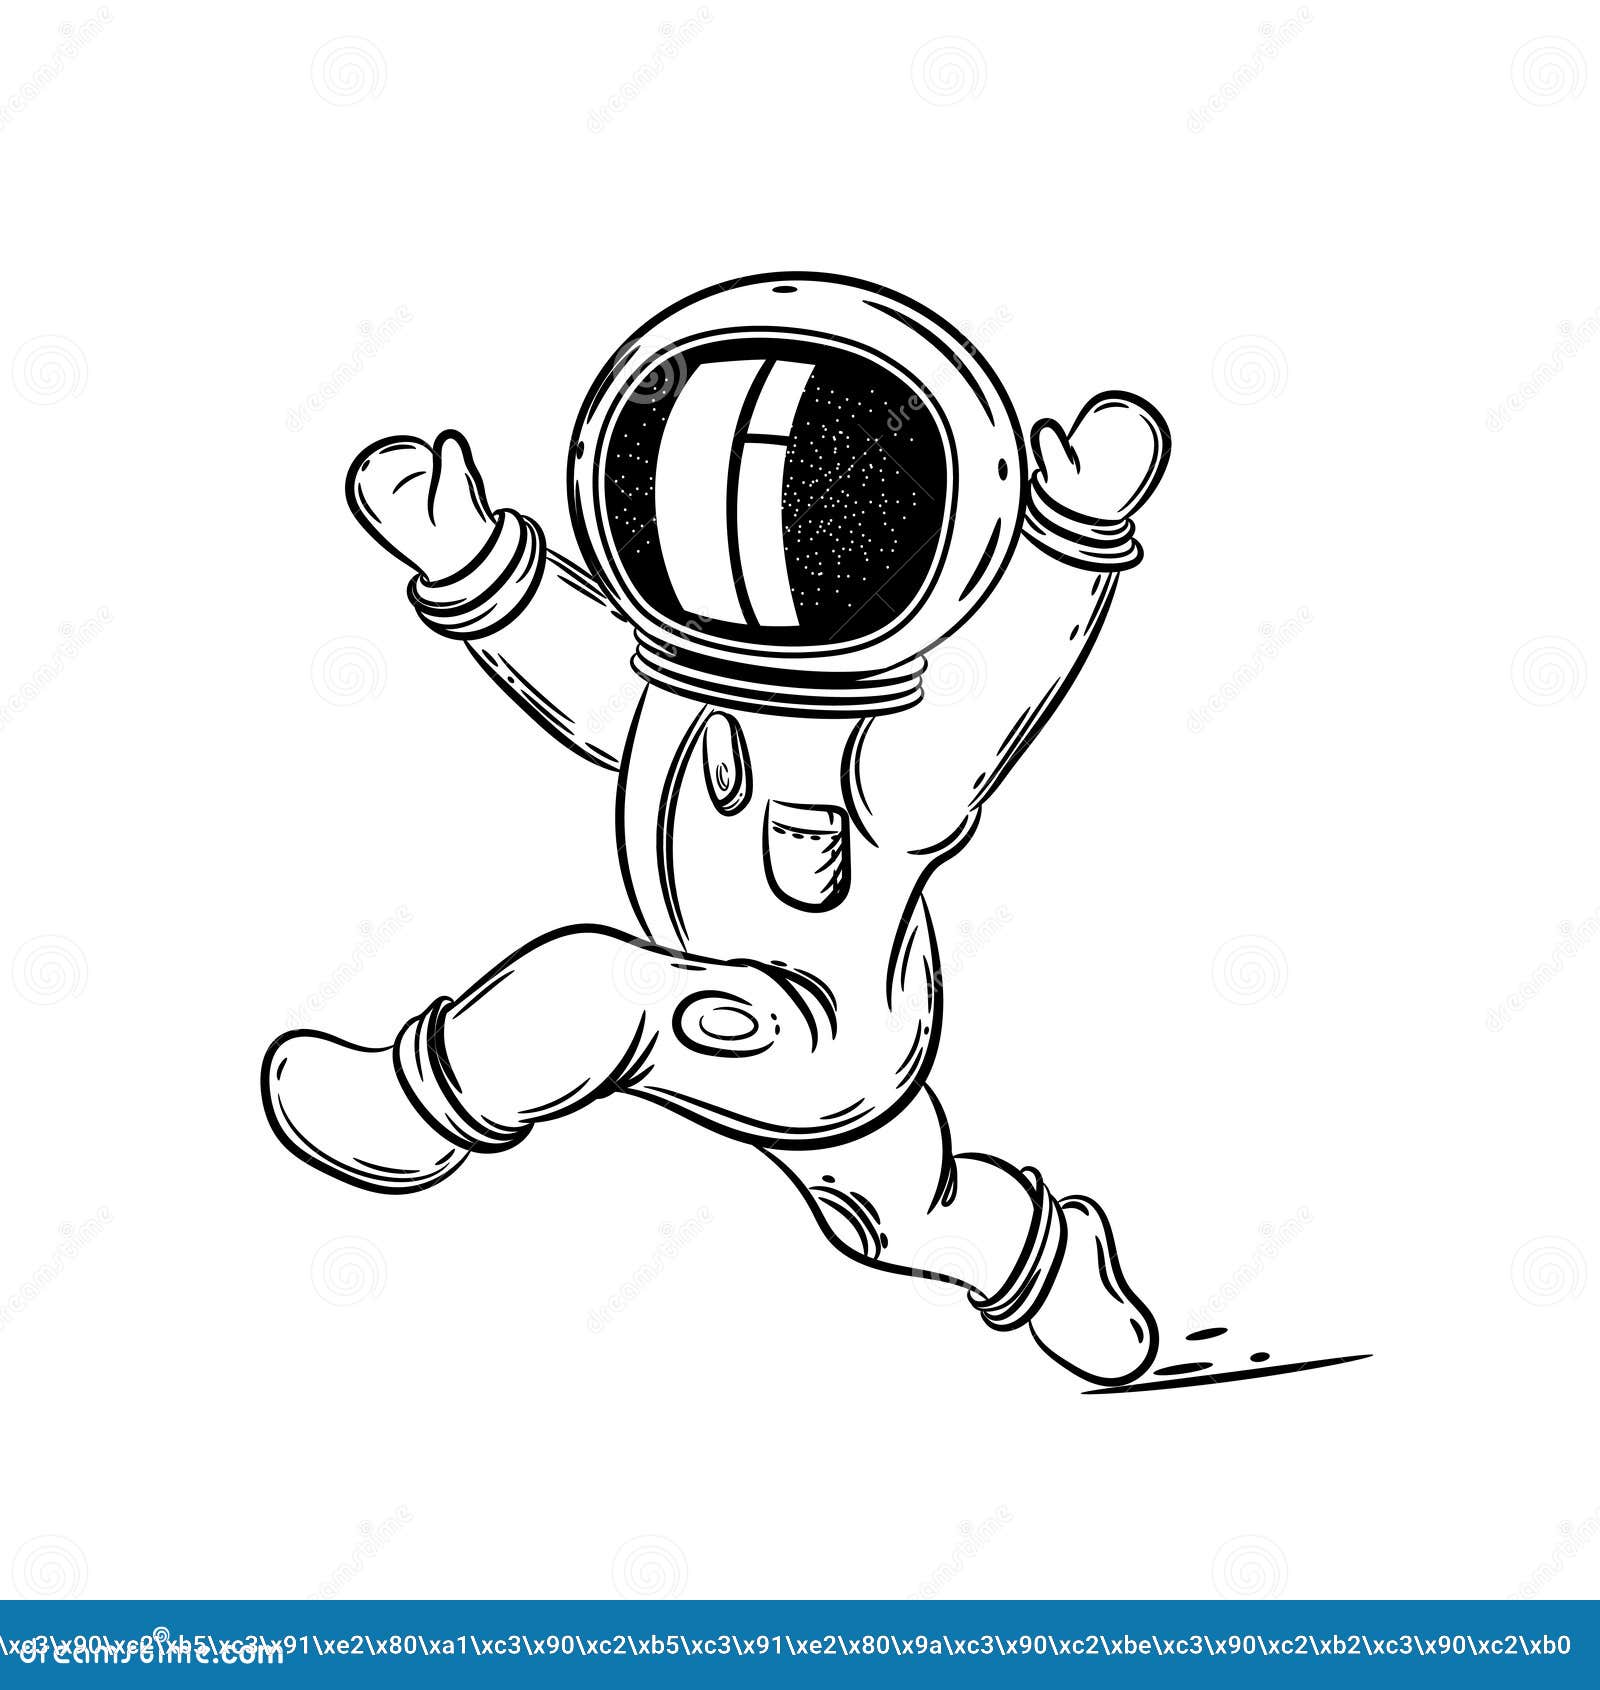 Download Astronaut Runs In Space. Coloring Page. Illustration On ...